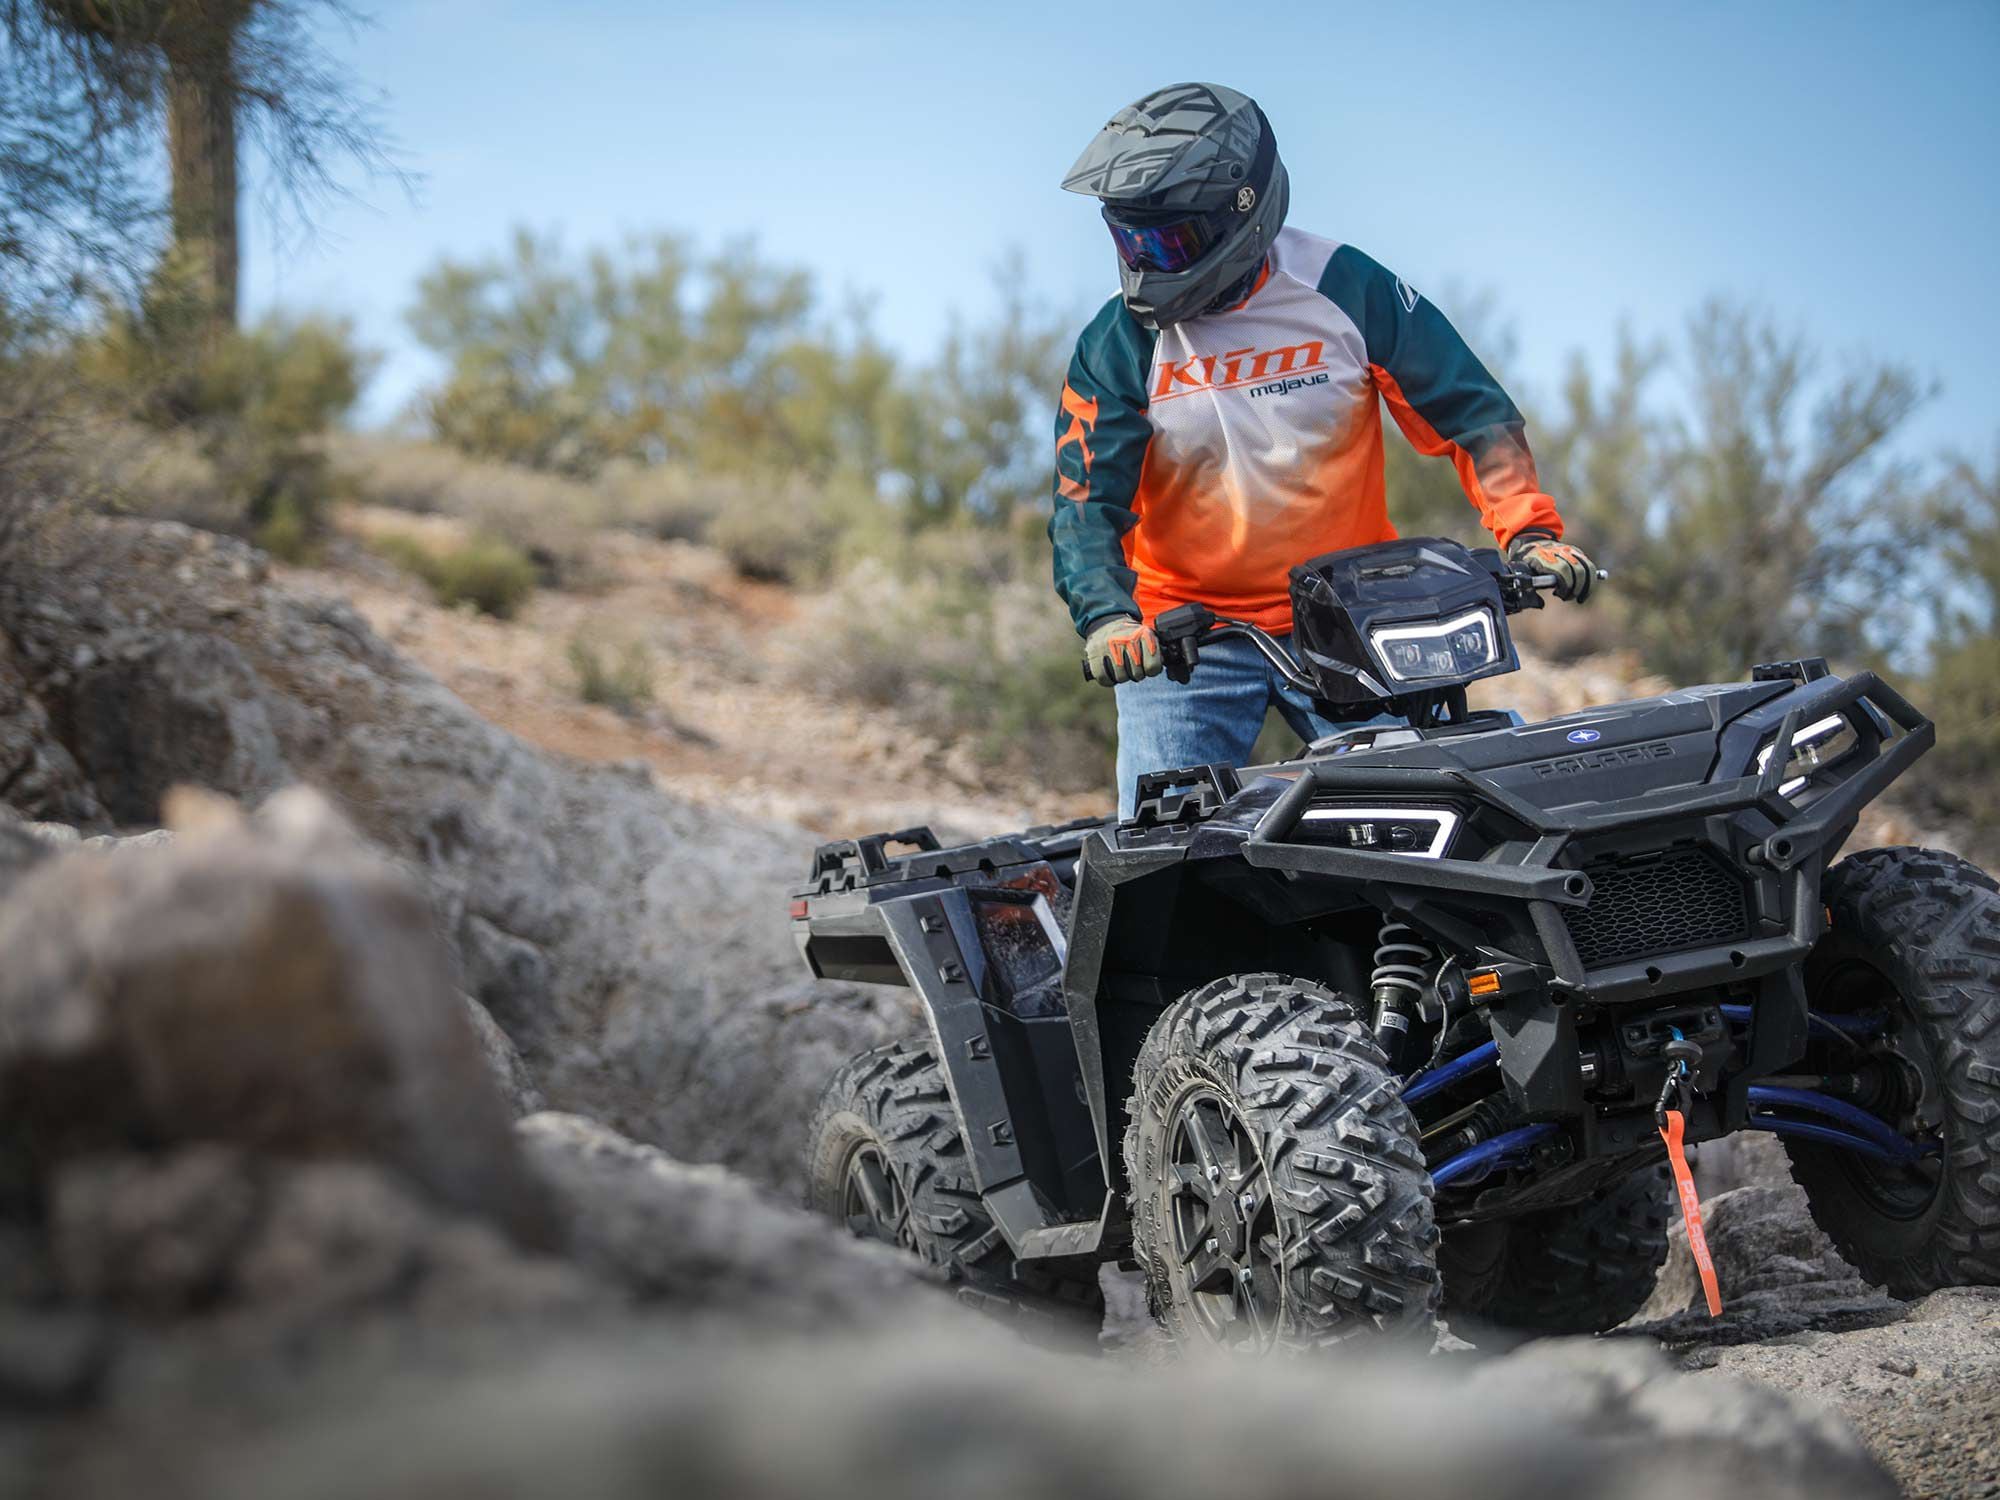 The Polaris Sportsman XP 1000 is a serious terrain dominator that is not suitable for beginners.